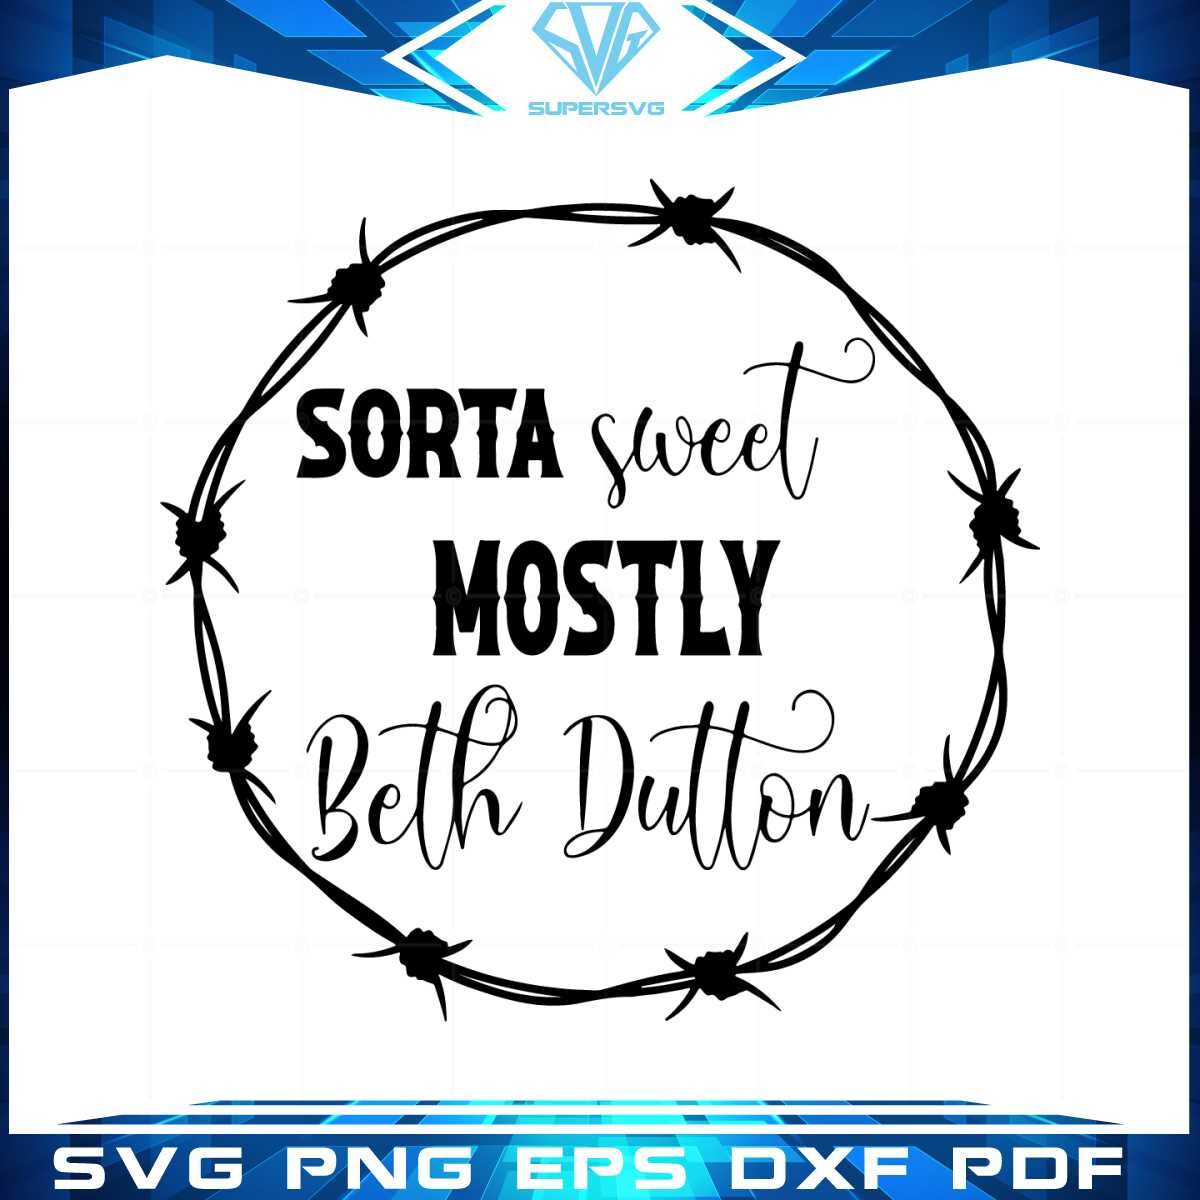 sorta-sweet-mostly-beth-dutton-svg-graphic-designs-files